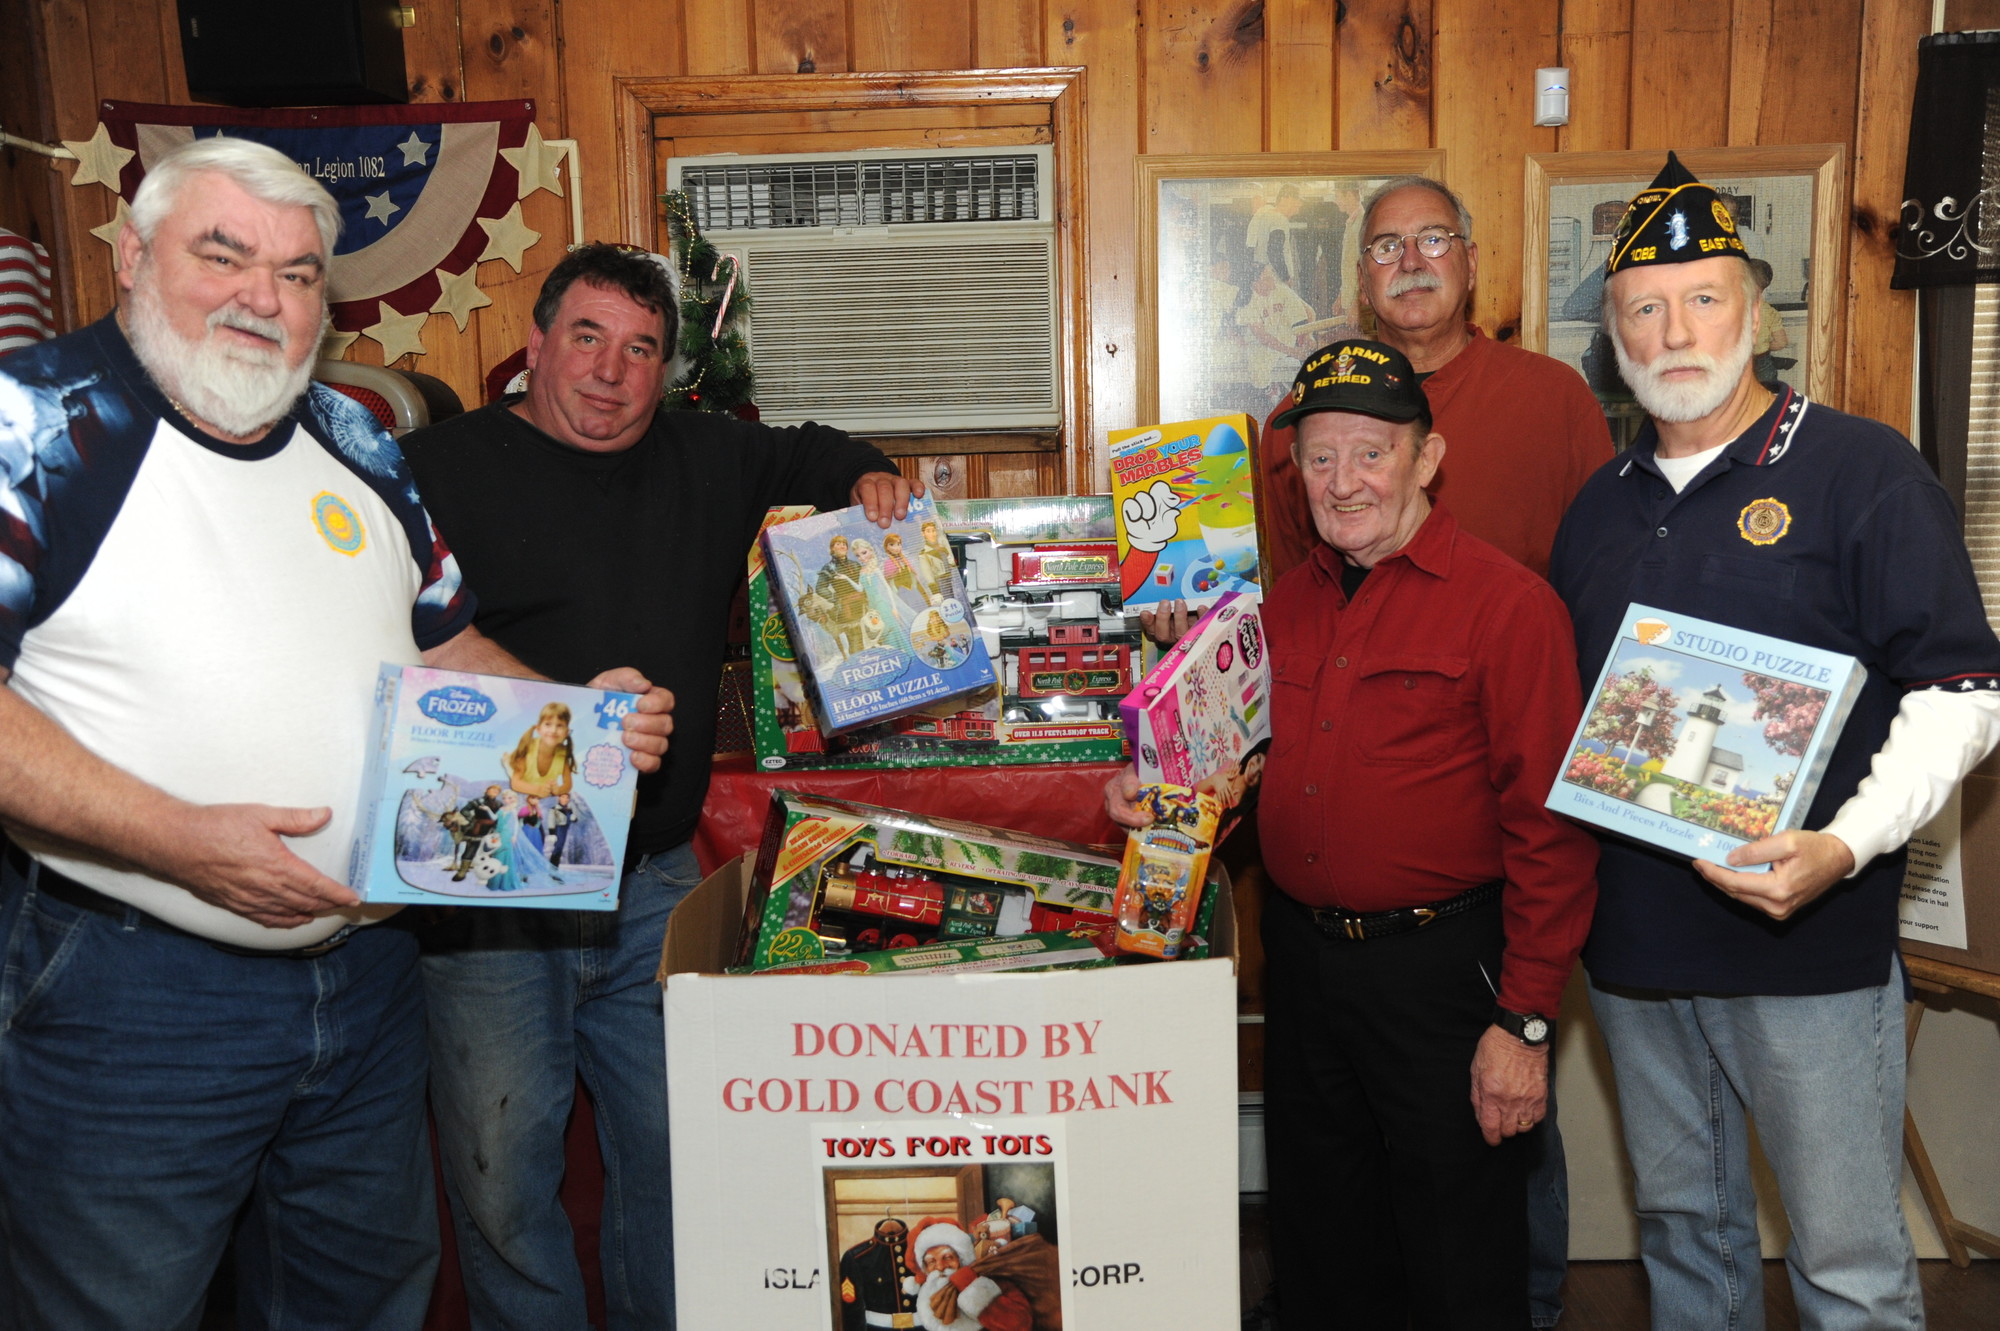 Thanks to $8,000 in donations, Legion members John Flower, far left, Cookie Phillips, Dan Carbonare, Eddie Grant and Fitzsimmons were able to purchase games for a Toys for Tots drive.